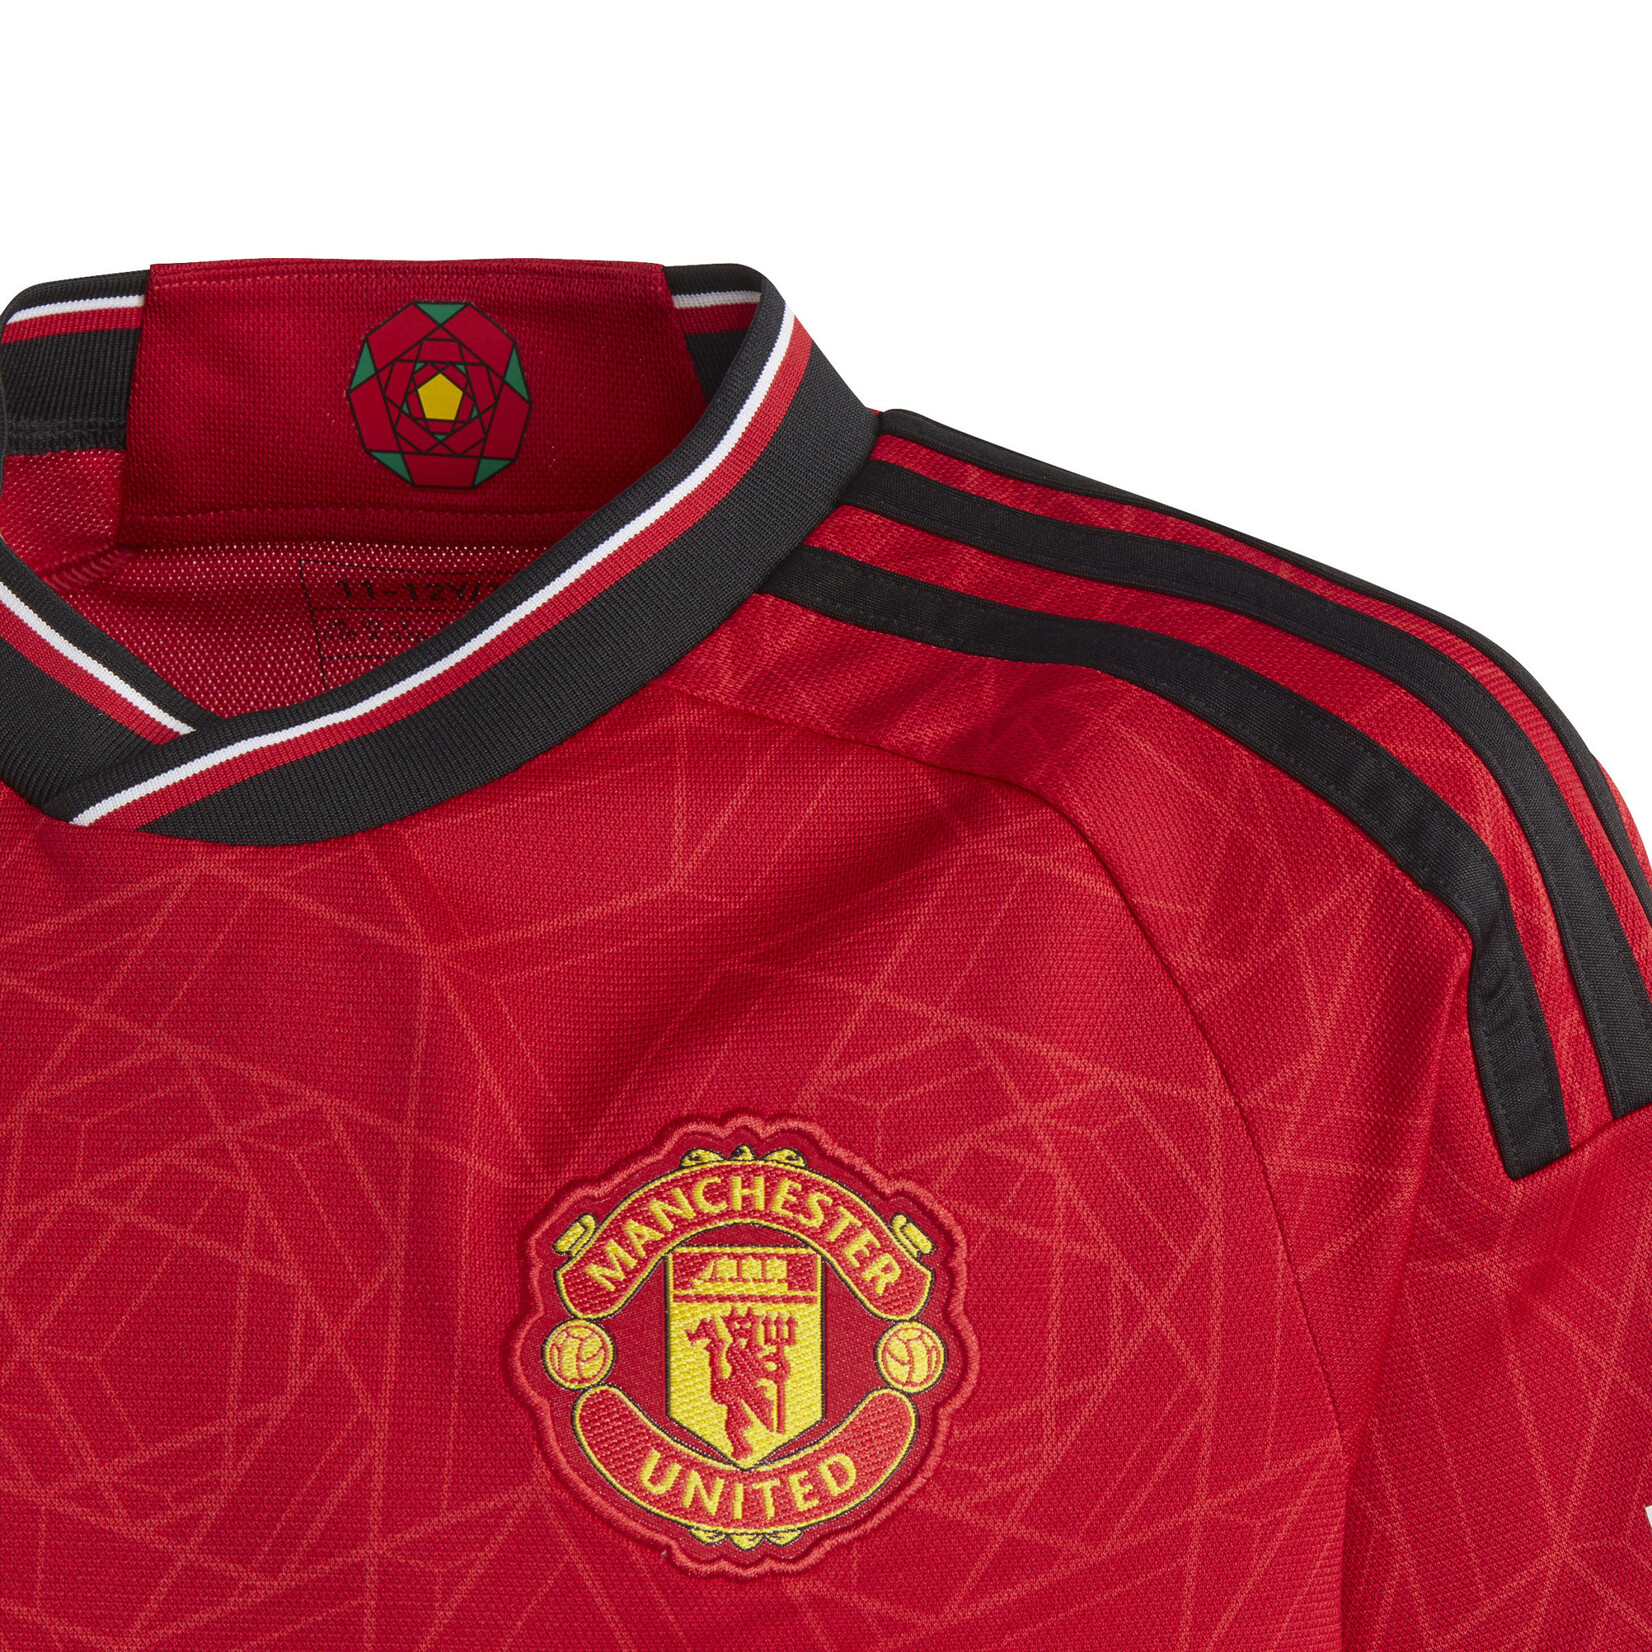 ADIDAS MANCHESTER UNITED 23/24 HOME JERSEY YOUTH (RED/BLACK)